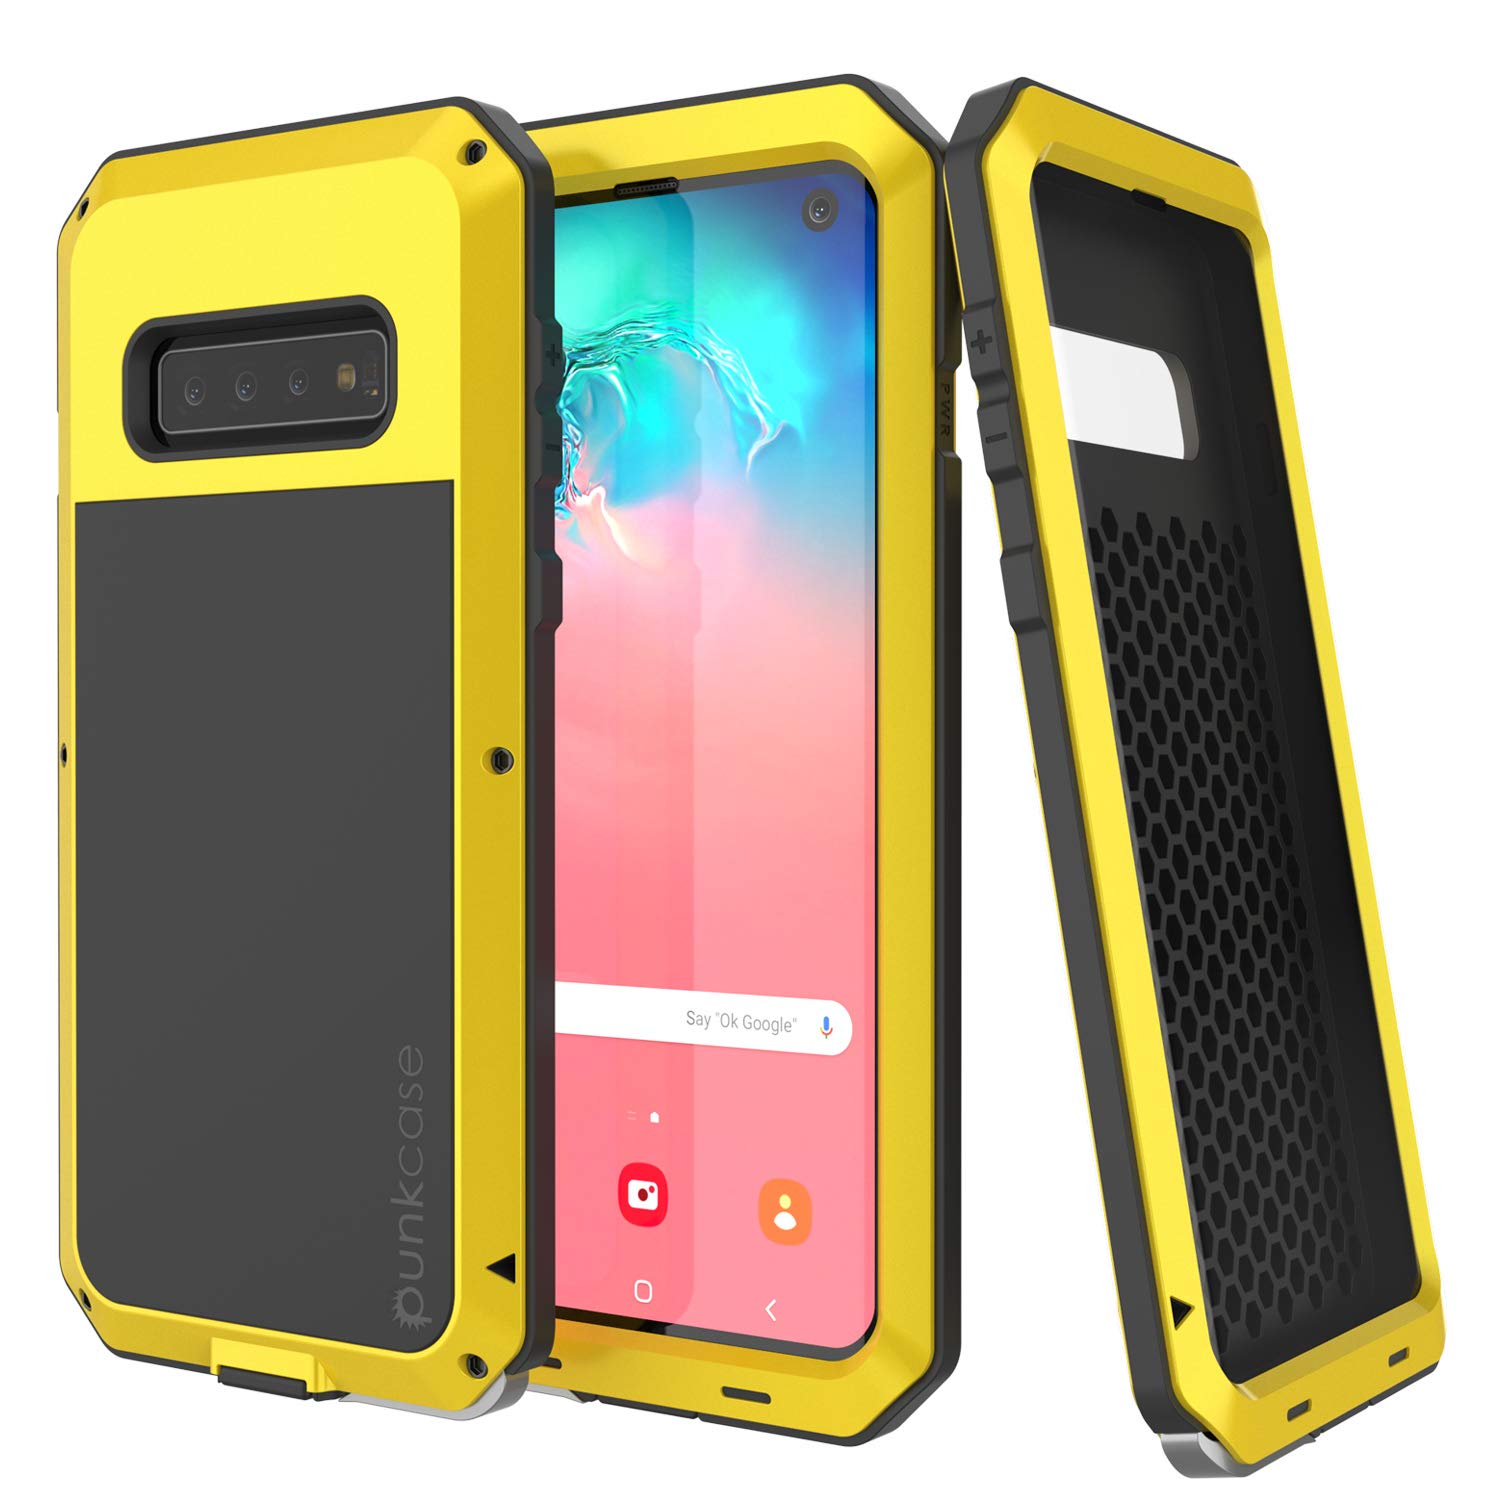 Galaxy S10+ Plus Metal Case, Heavy Duty Military Grade Rugged Armor Cover [Neon]